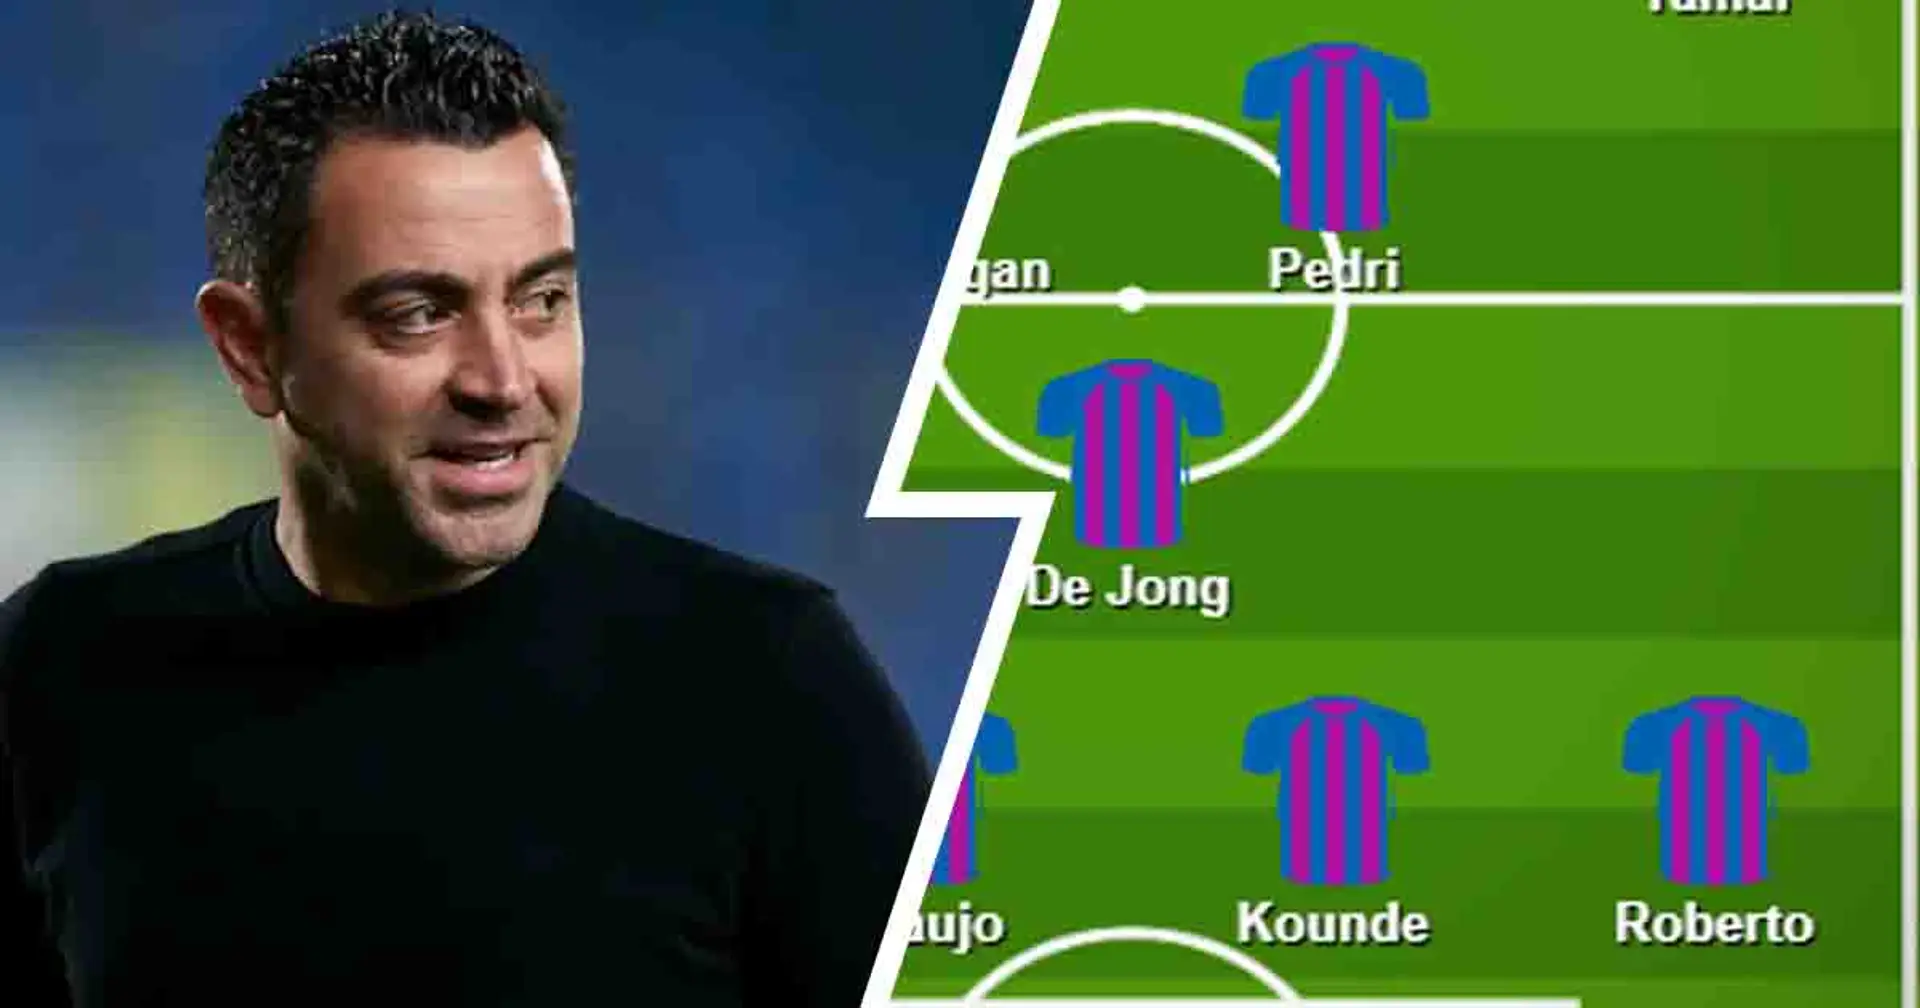 'Araujo and Kounde is good': Barca fans name ideal XI for Real Betis clash